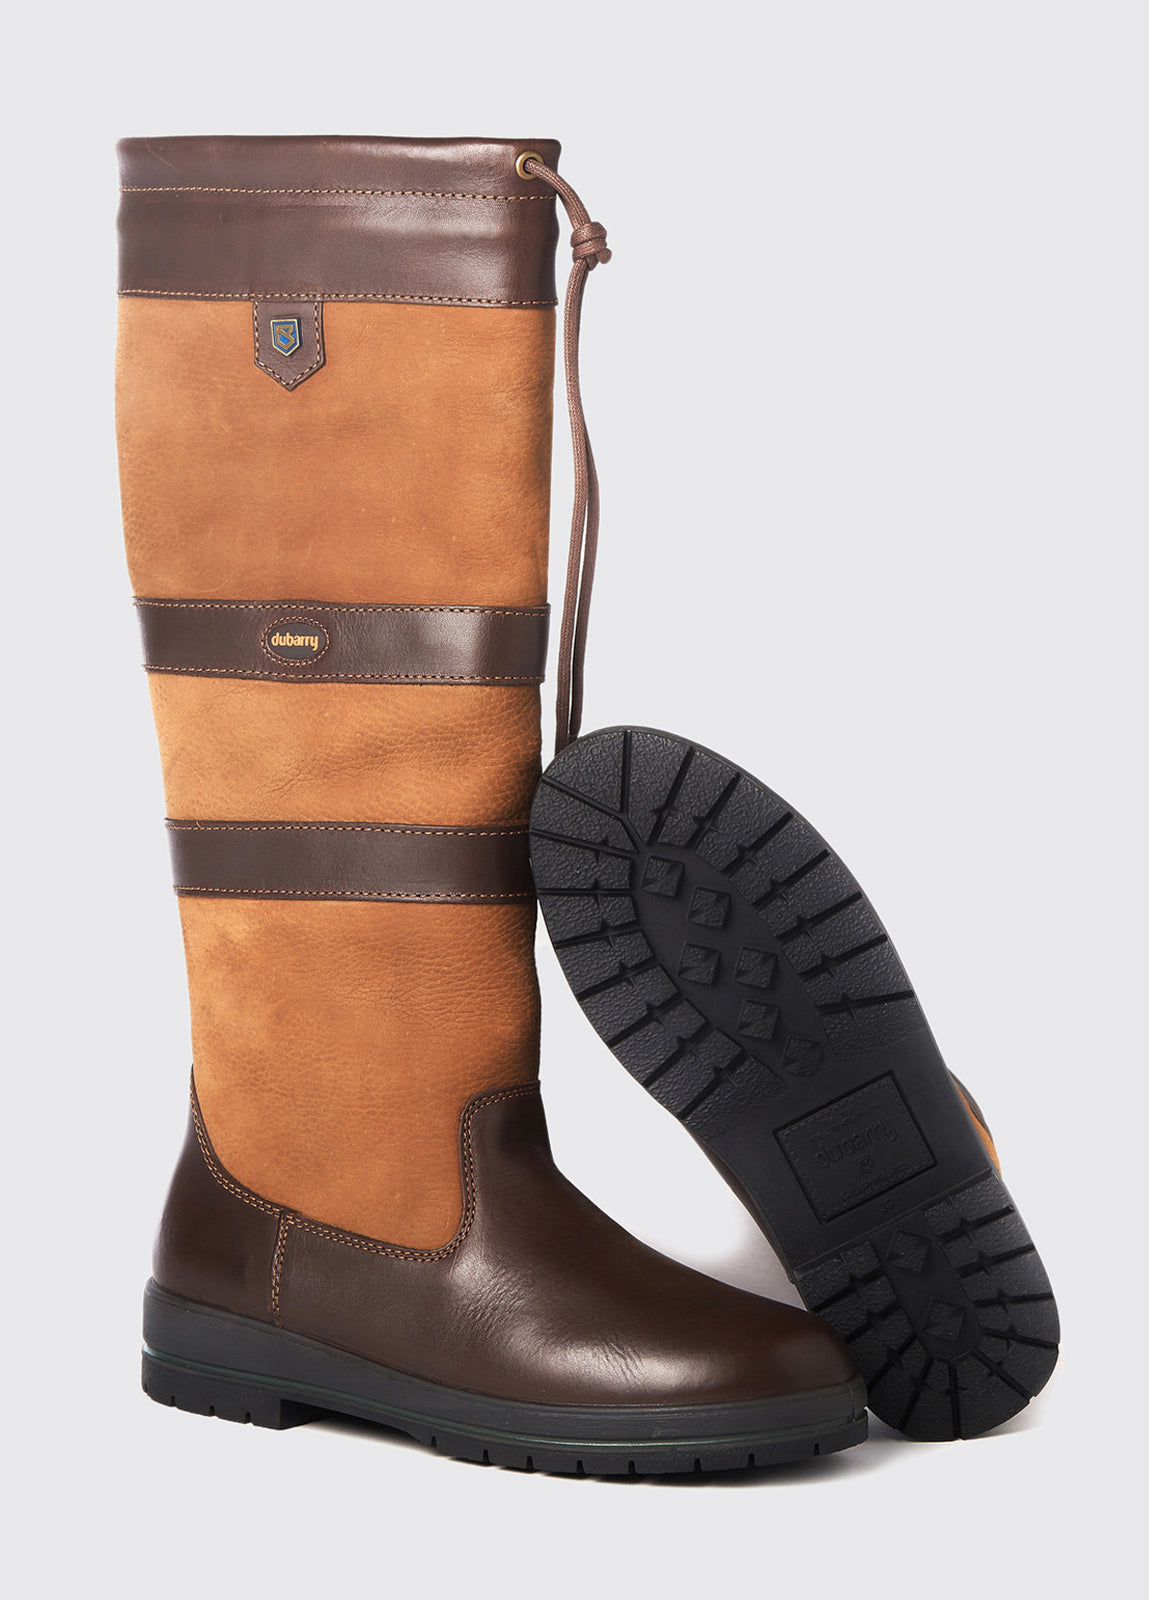 Dubarry Galway –